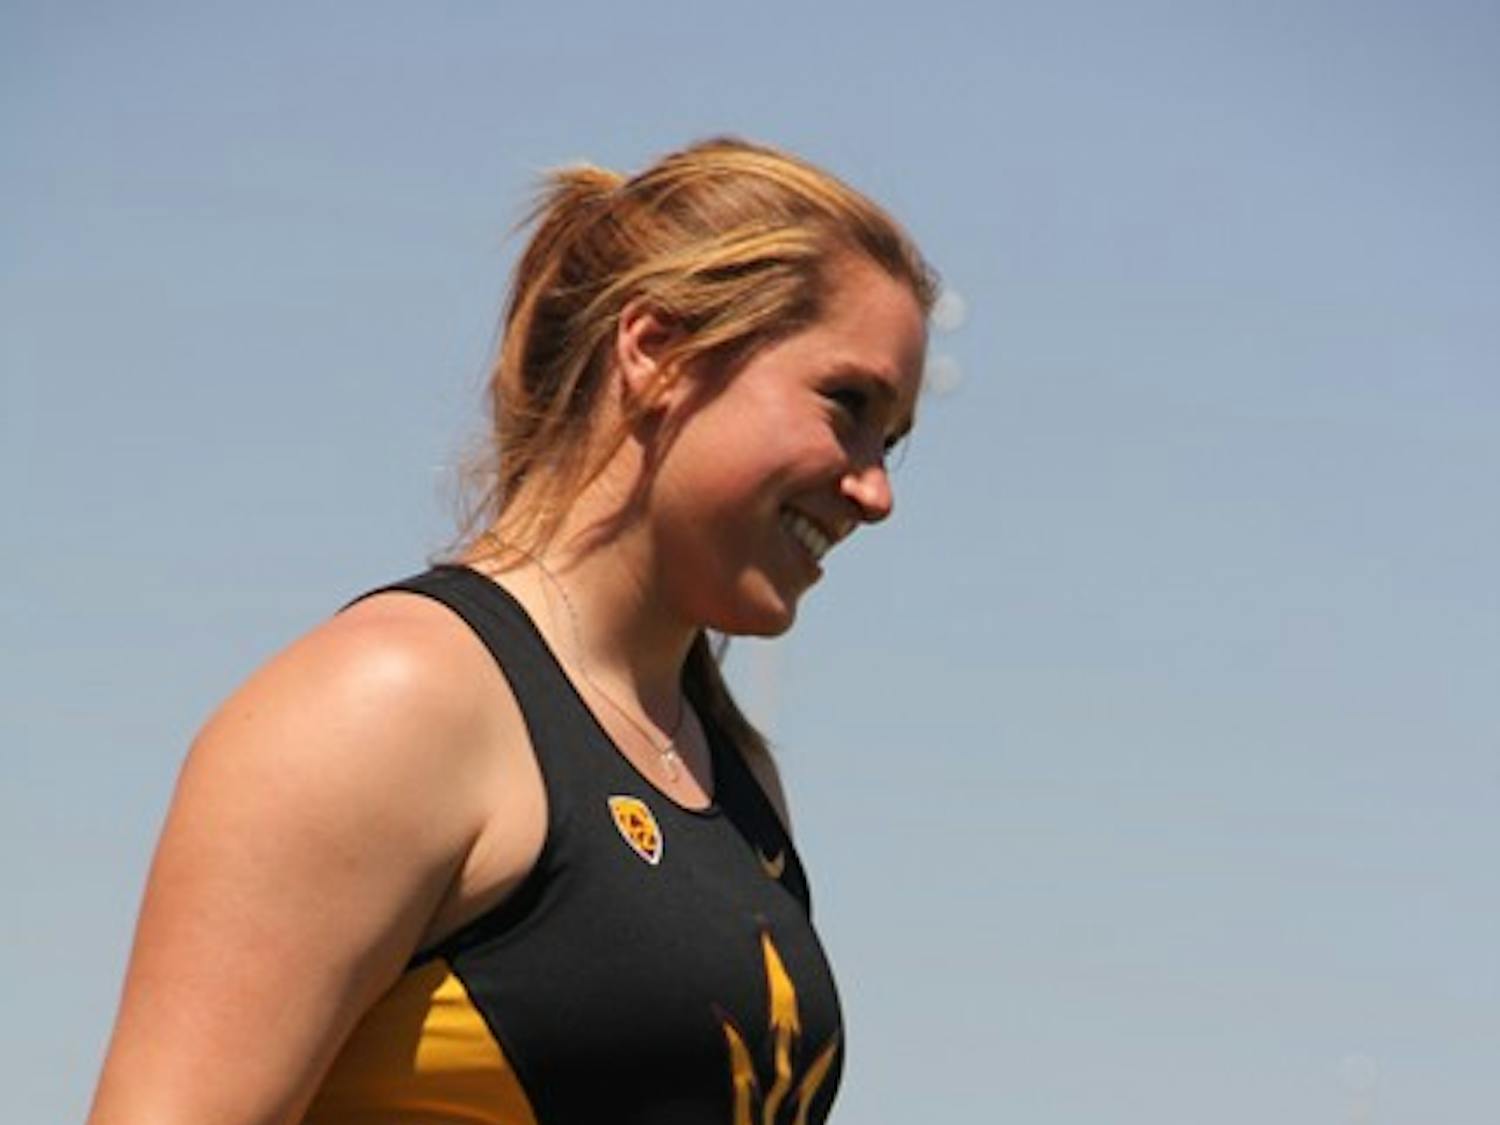 Redshirt junior thrower Chelsea Cassulo walks off the field after throwing during the Sun Angel Classic on April 6. Cassulo and the rest of the track and field team travel to face LSU this weekend. (Photo by Abhiram Chandrashekar)